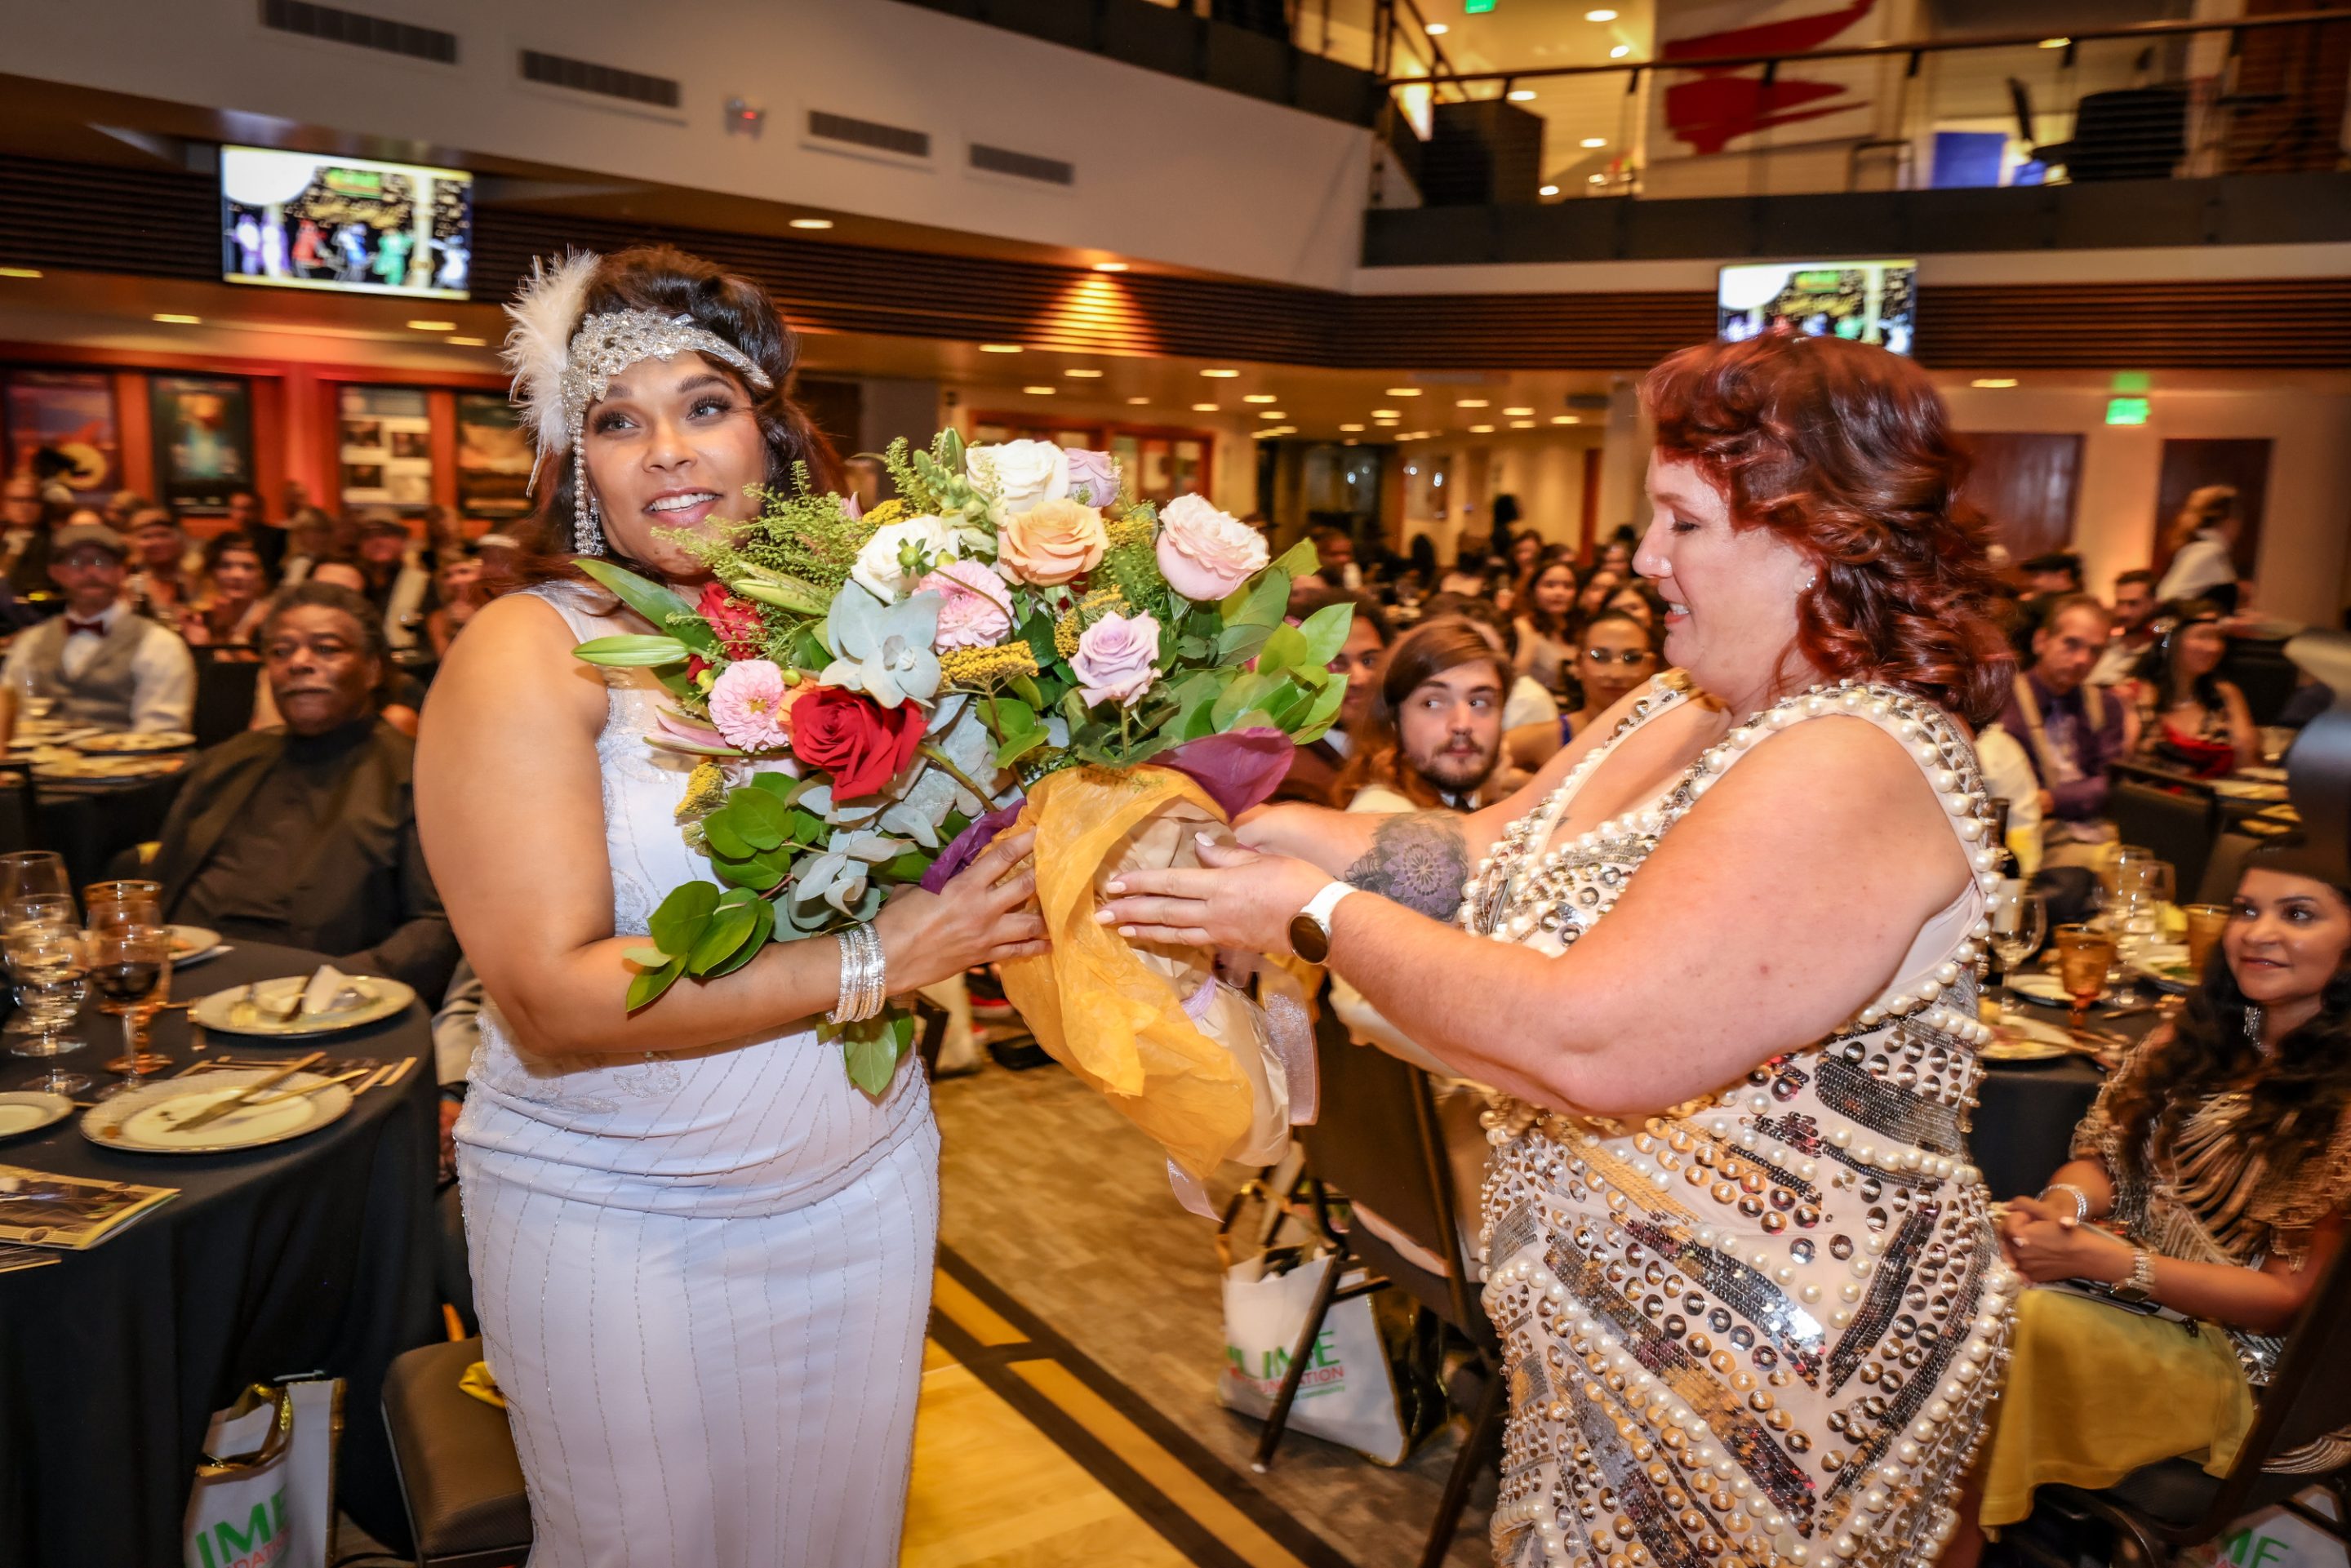 At an event, a woman is presenting a bouquet to another woman associated with The LIME Foundation of Santa Rosa.